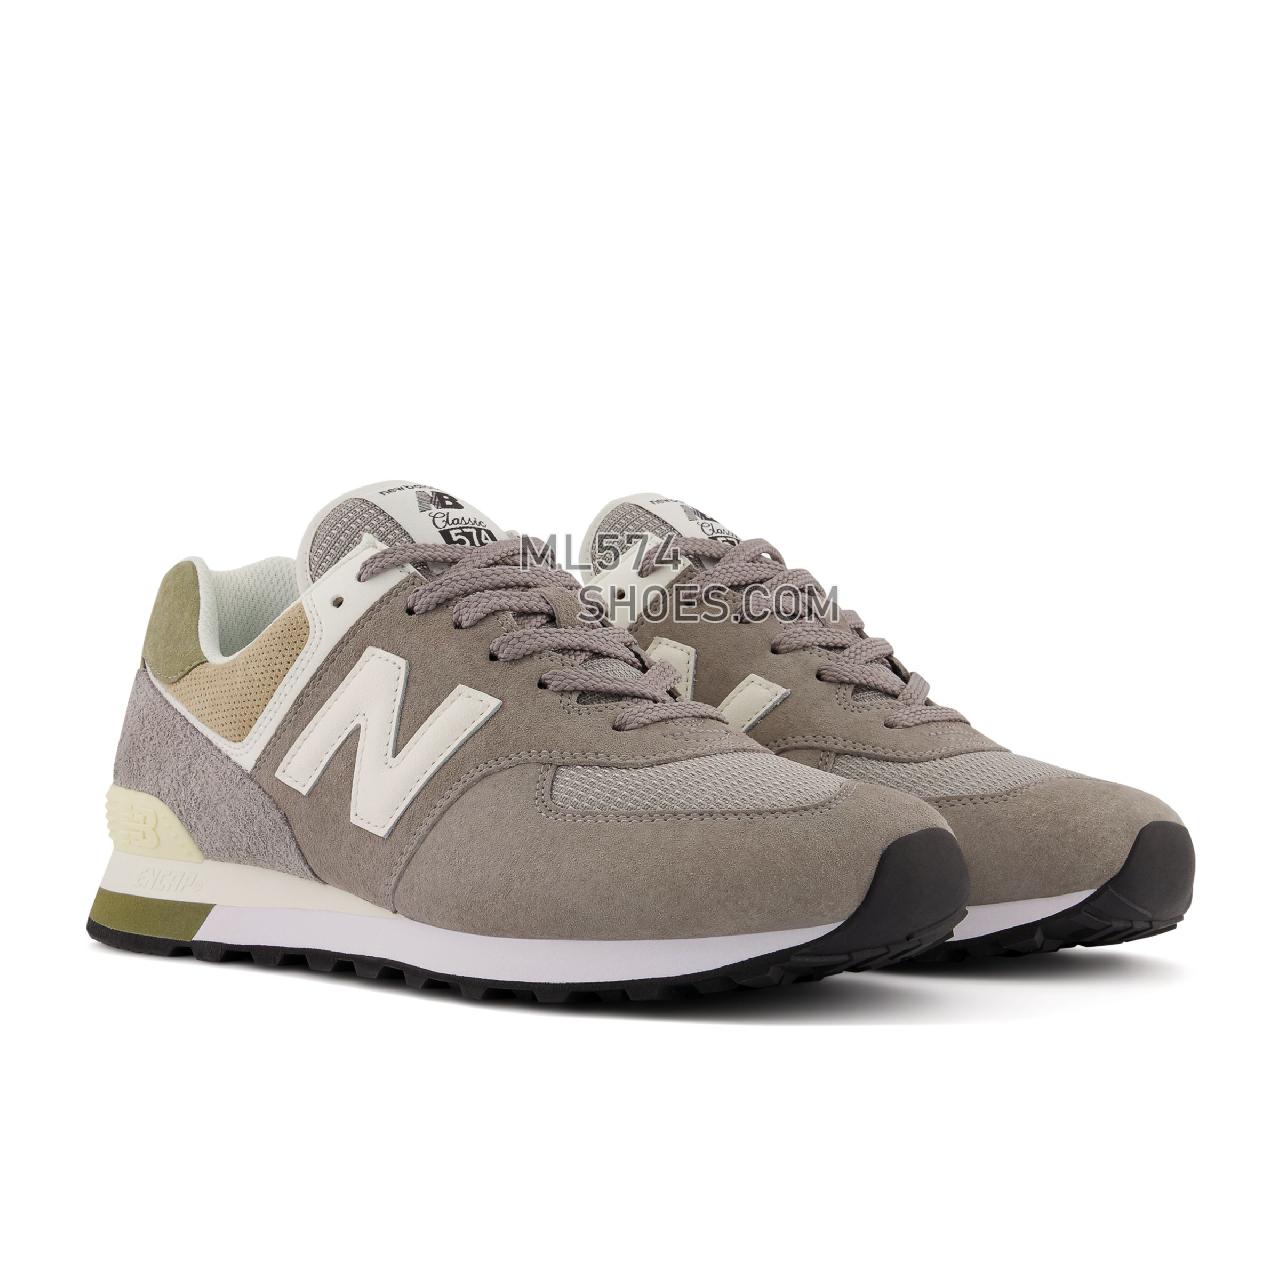 New Balance 574v2 - Men's Classic Sneakers - Marblehead with Incense - ML574TT2